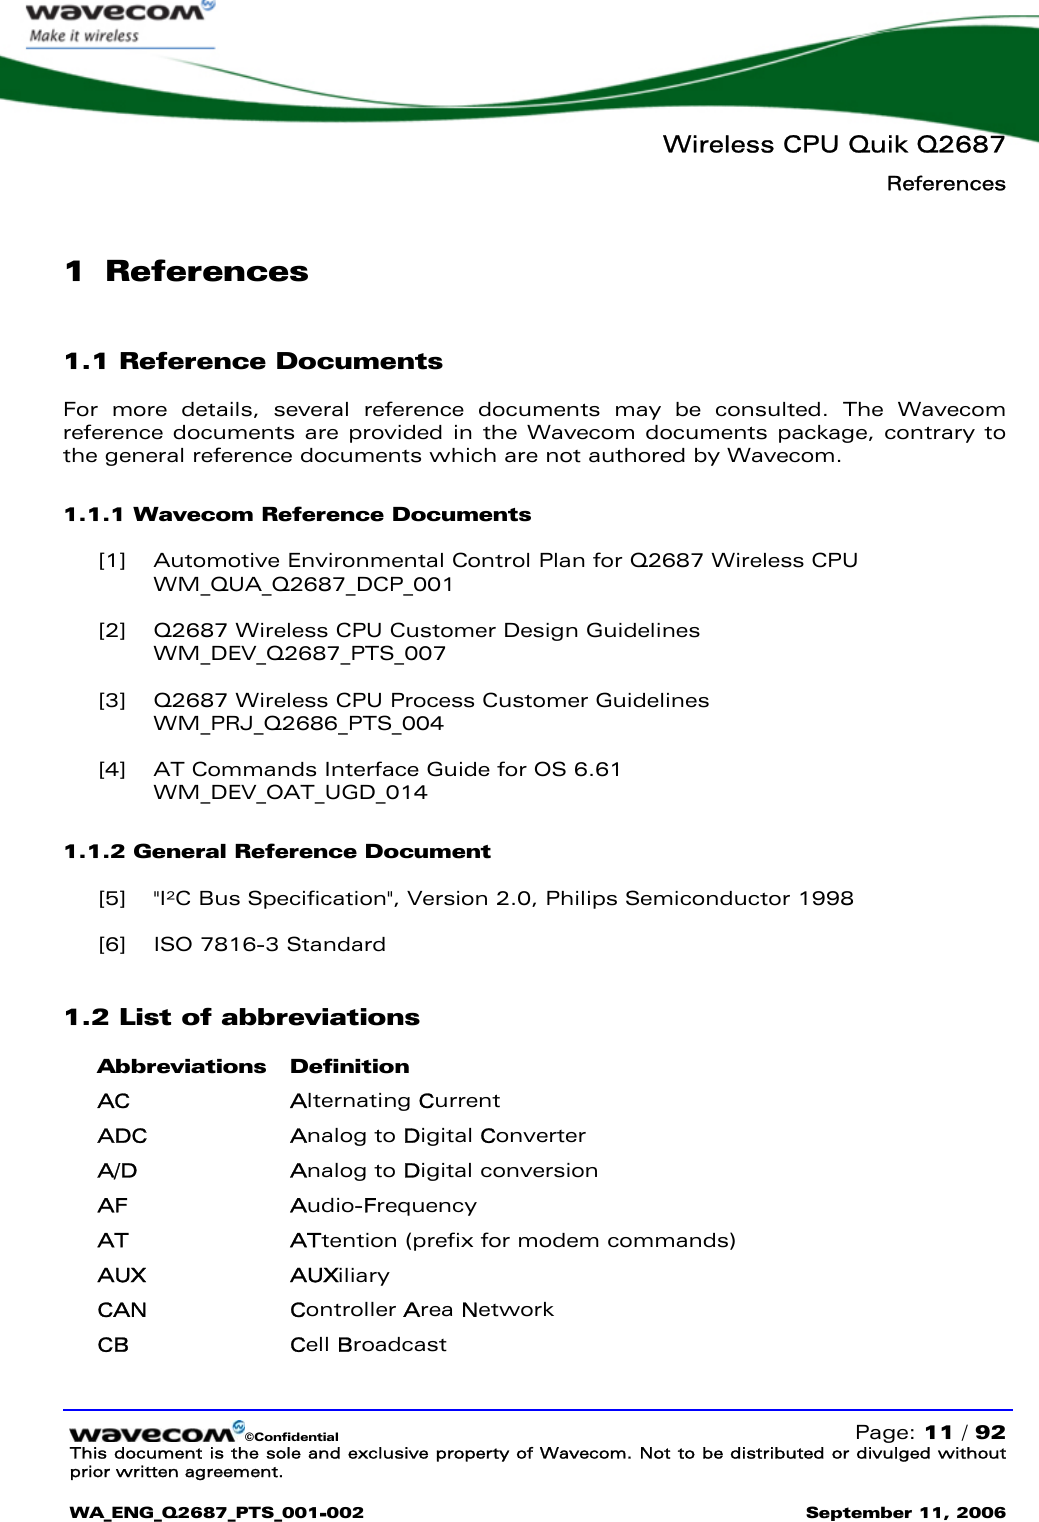   Wireless CPU Quik Q2687 References  ©Confidential   Page: 11 / 92 This document is the sole and exclusive property of Wavecom. Not to be distributed or divulged without prior written agreement.  WA_ENG_Q2687_PTS_001-002 September 11, 2006   1 References 1.1 Reference Documents For more details, several reference documents may be consulted. The Wavecom reference documents are provided in the Wavecom documents package, contrary to the general reference documents which are not authored by Wavecom. 1.1.1 Wavecom Reference Documents [1] Automotive Environmental Control Plan for Q2687 Wireless CPU WM_QUA_Q2687_DCP_001 [2] Q2687 Wireless CPU Customer Design Guidelines WM_DEV_Q2687_PTS_007 [3] Q2687 Wireless CPU Process Customer Guidelines WM_PRJ_Q2686_PTS_004 [4] AT Commands Interface Guide for OS 6.61 WM_DEV_OAT_UGD_014 1.1.2 General Reference Document [5] &quot;I²C Bus Specification&quot;, Version 2.0, Philips Semiconductor 1998 [6] ISO 7816-3 Standard 1.2 List of abbreviations Abbreviations Definition AC Alternating Current ADC Analog to Digital Converter A/D Analog to Digital conversion AF Audio-Frequency AT ATtention (prefix for modem commands) AUX AUXiliary CAN Controller Area Network CB Cell Broadcast 